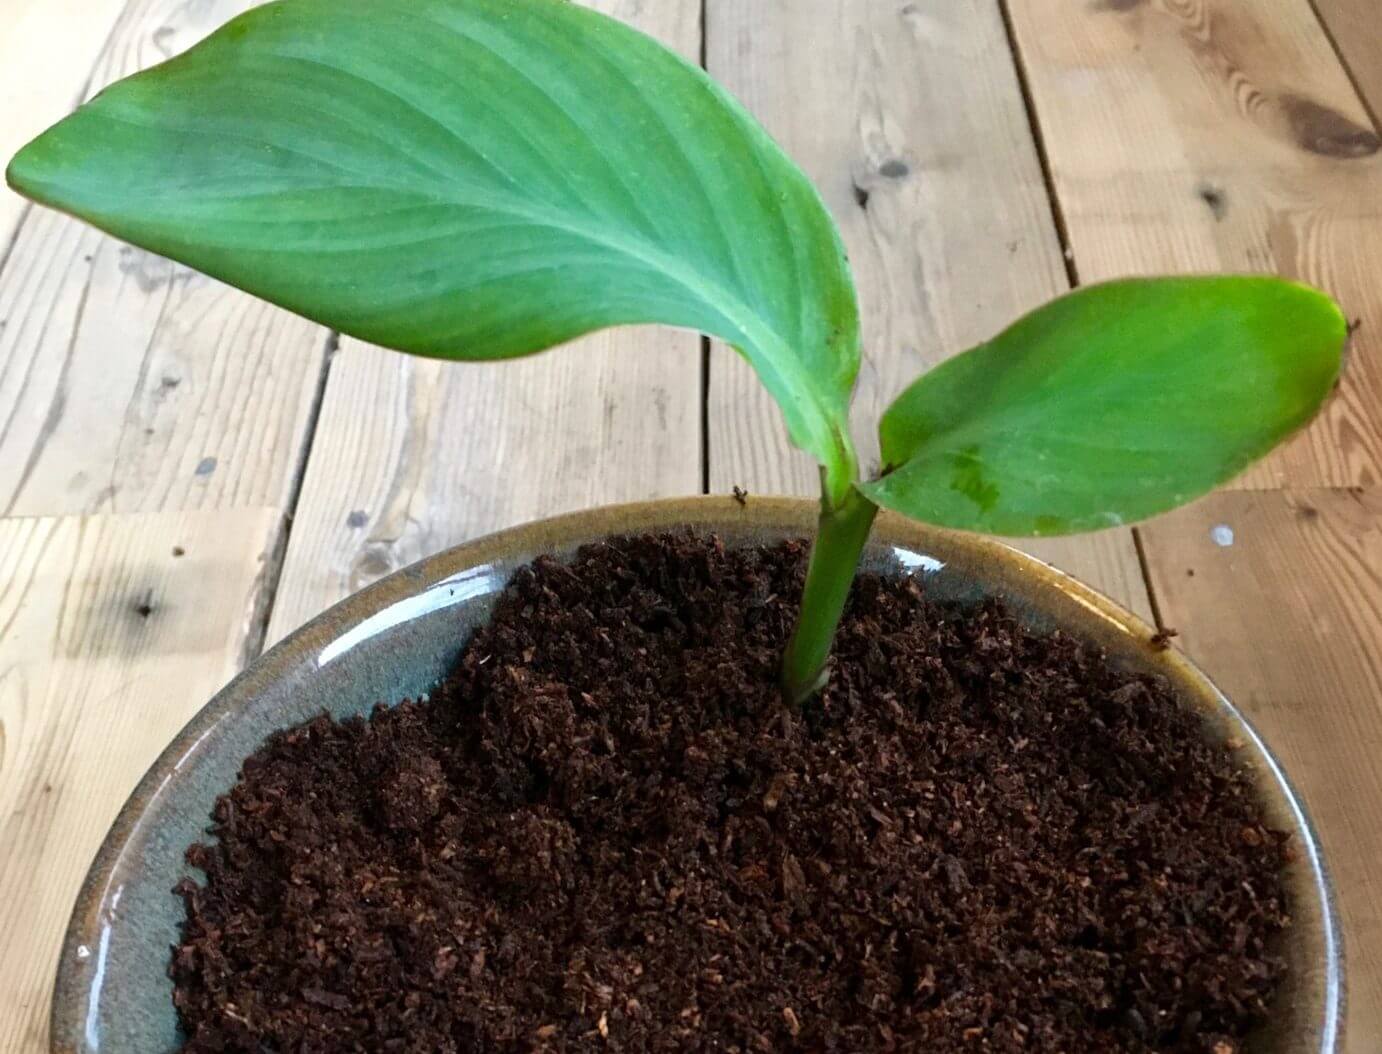 A potted plant growing in finished urine compost